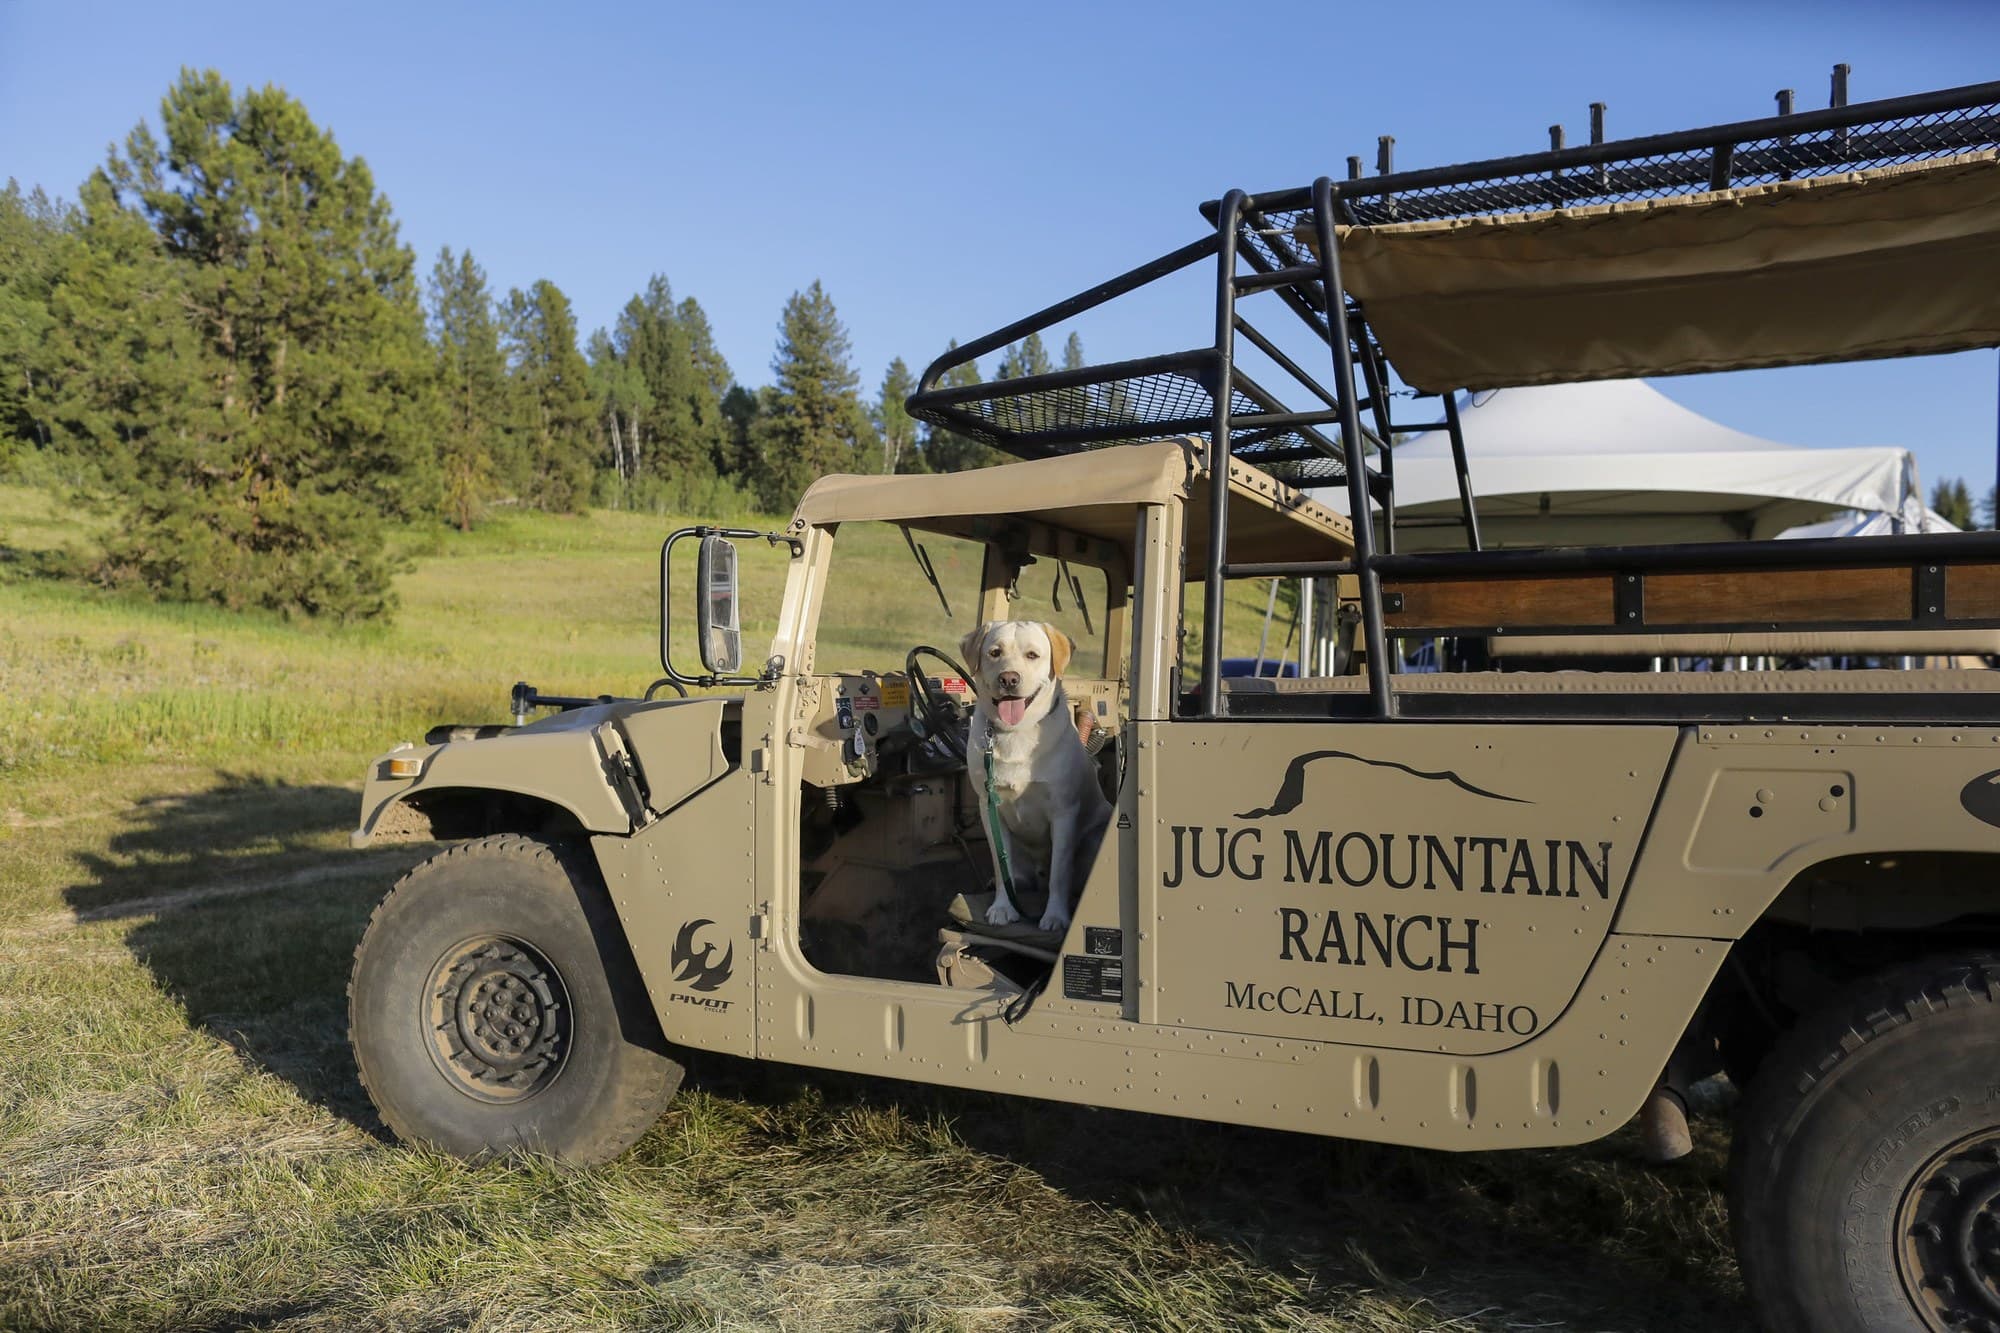 Dog sitting in a mountain bike shuttle at Jug Mountain Ranch during Open Roads van life festival